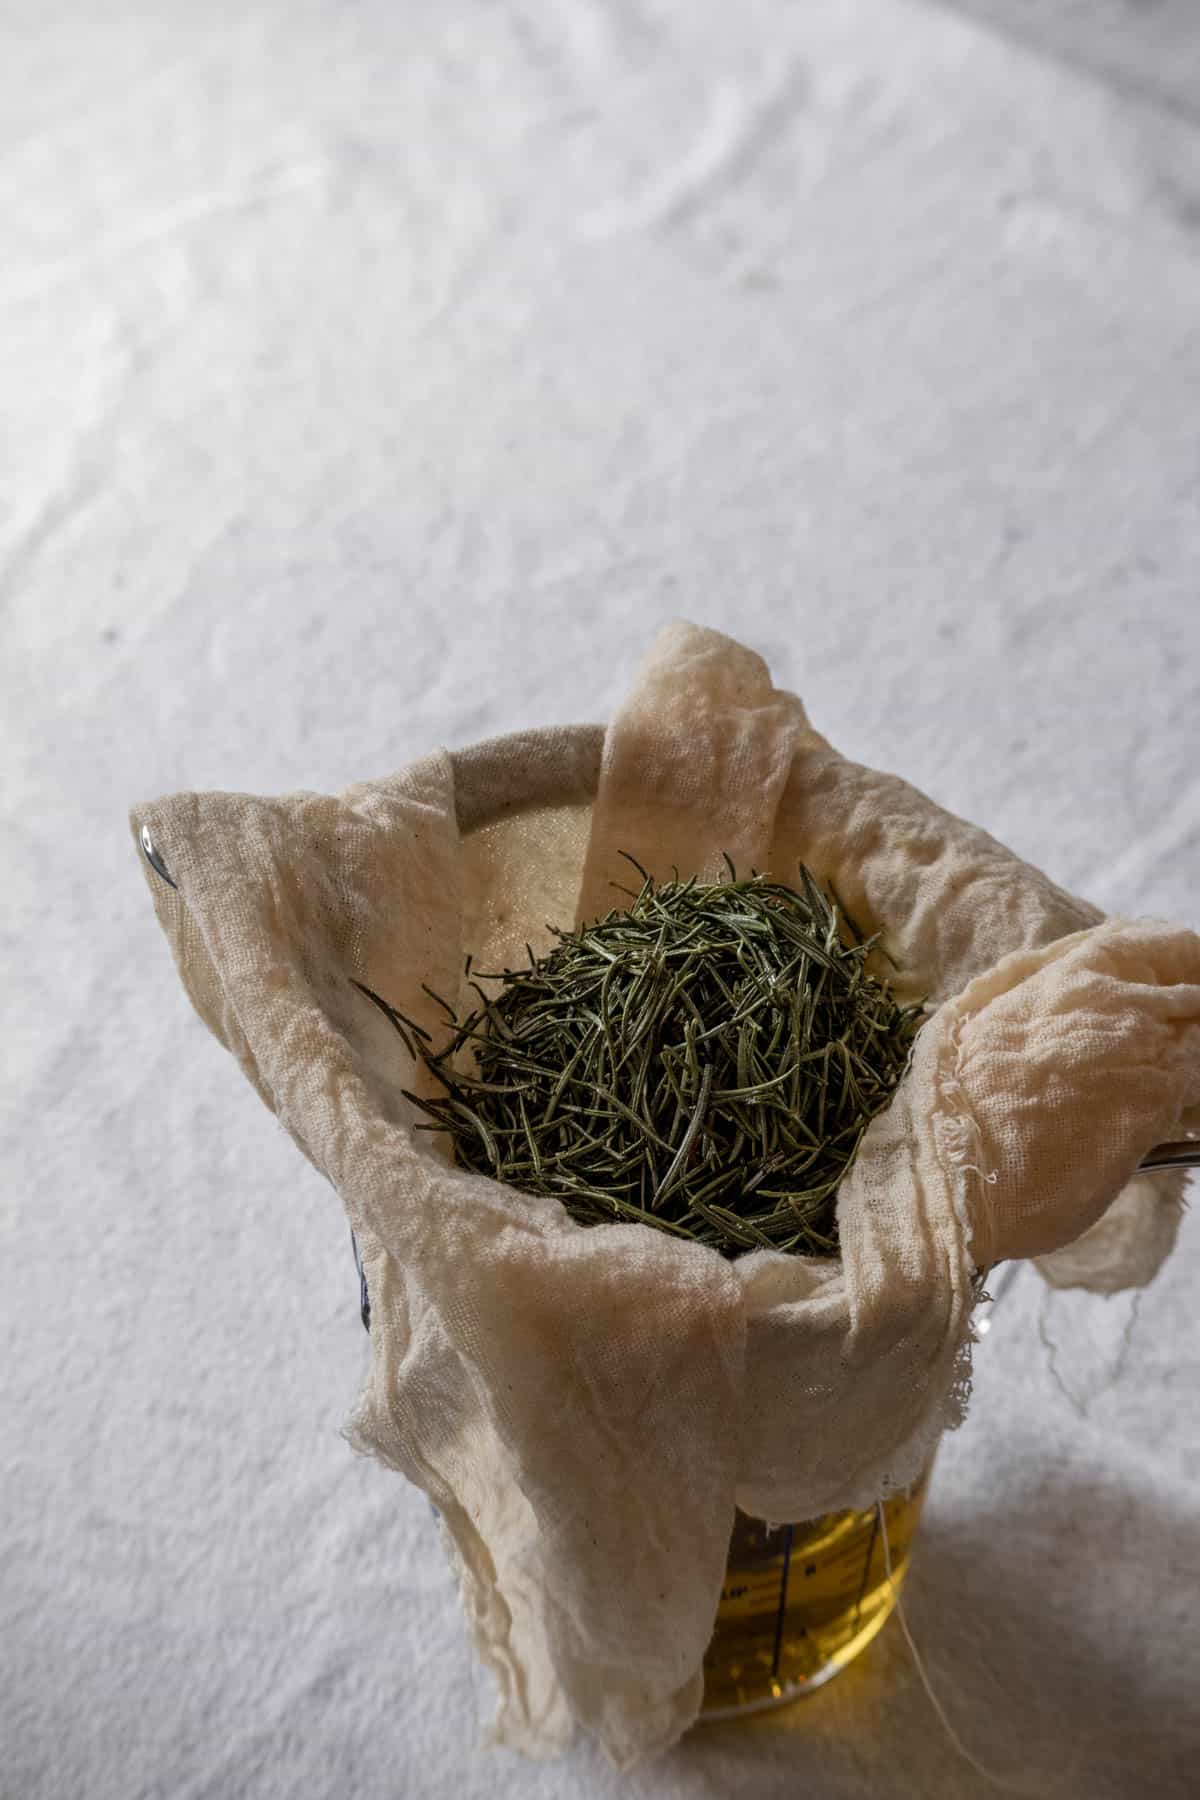 Rosemary oil filtering through a cheesecloth